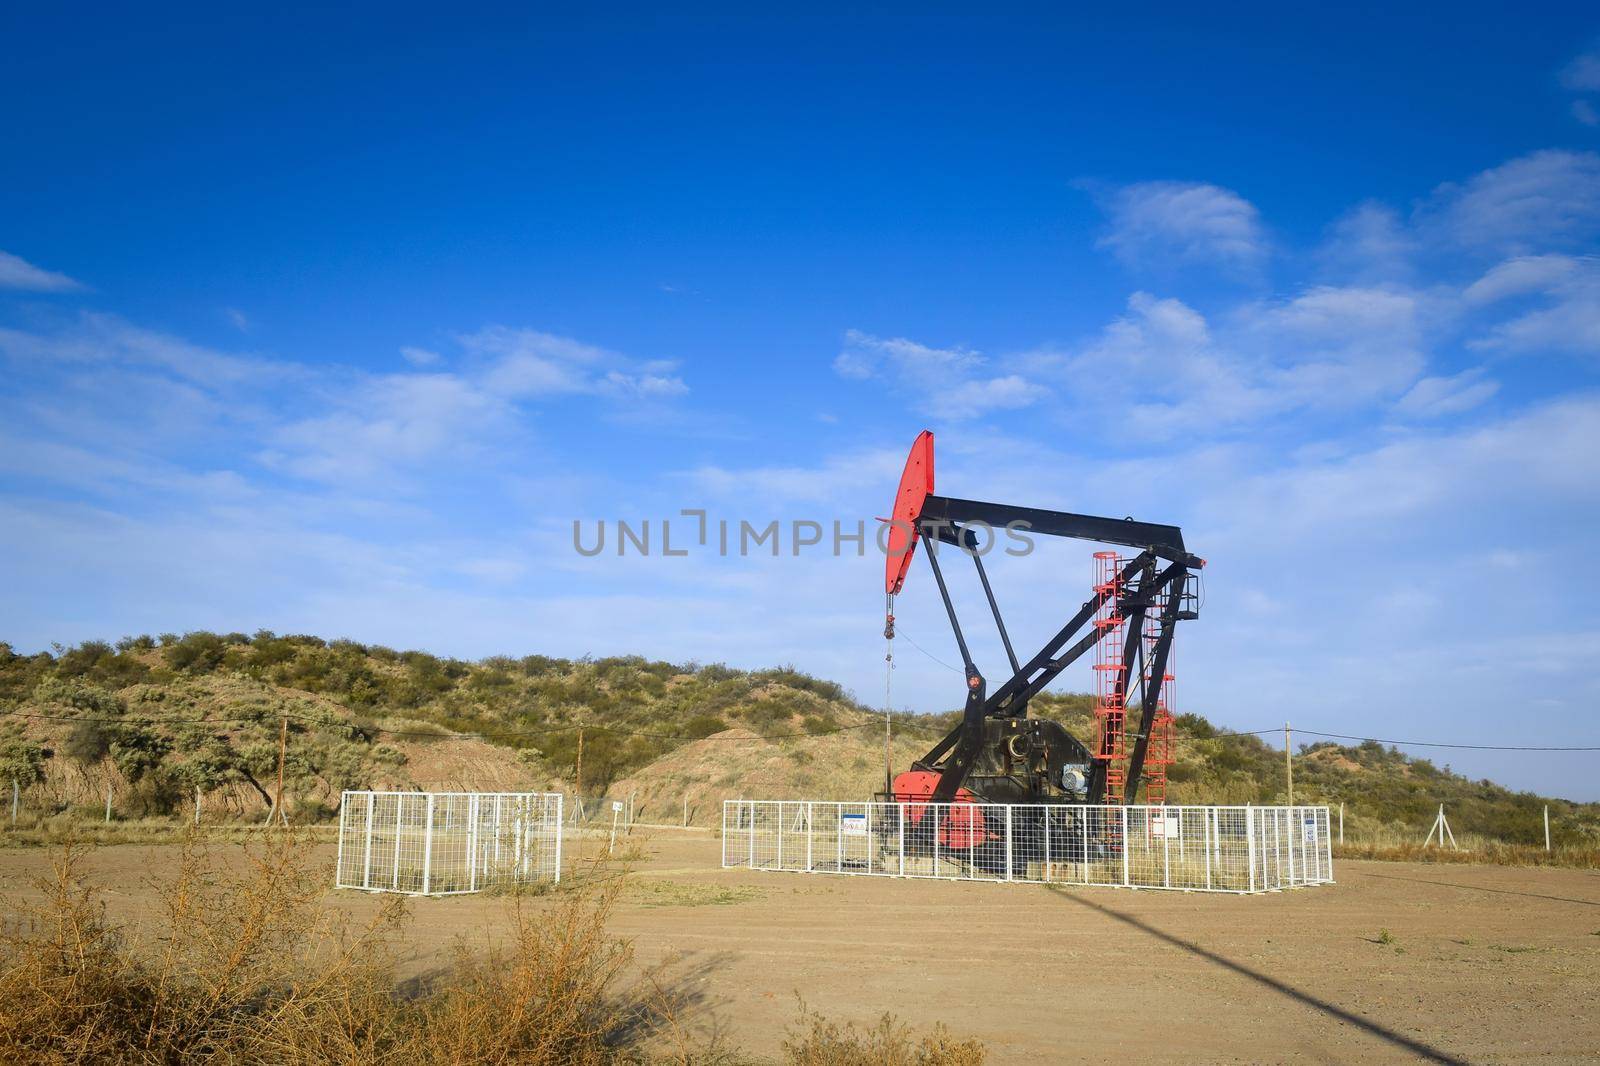 Oil extraction pumpjack in the desert of Mendoza, Argentina.